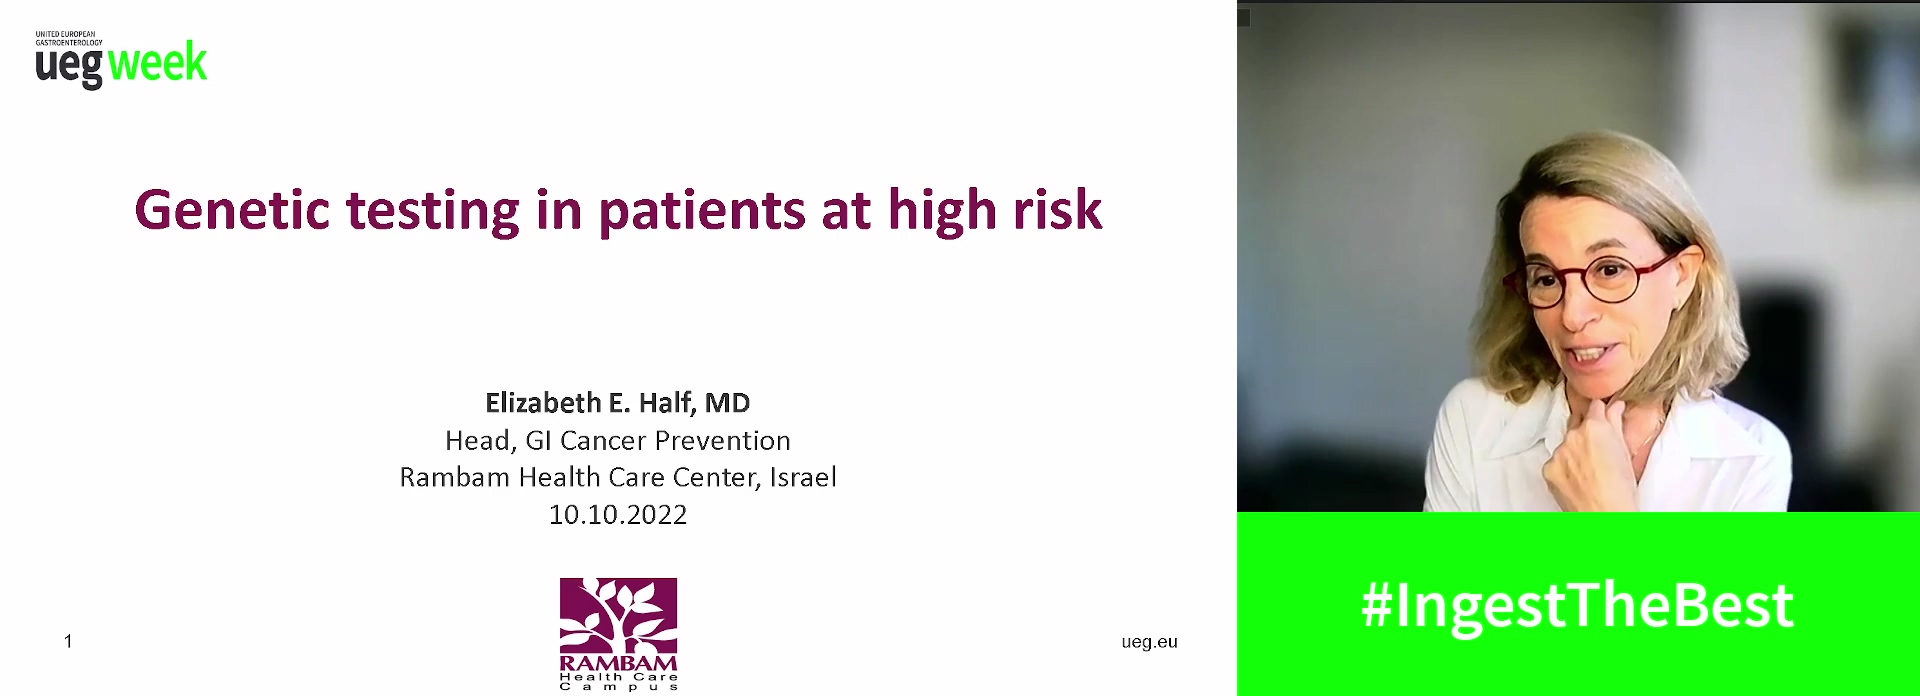 Genetic testing in patients at high risk